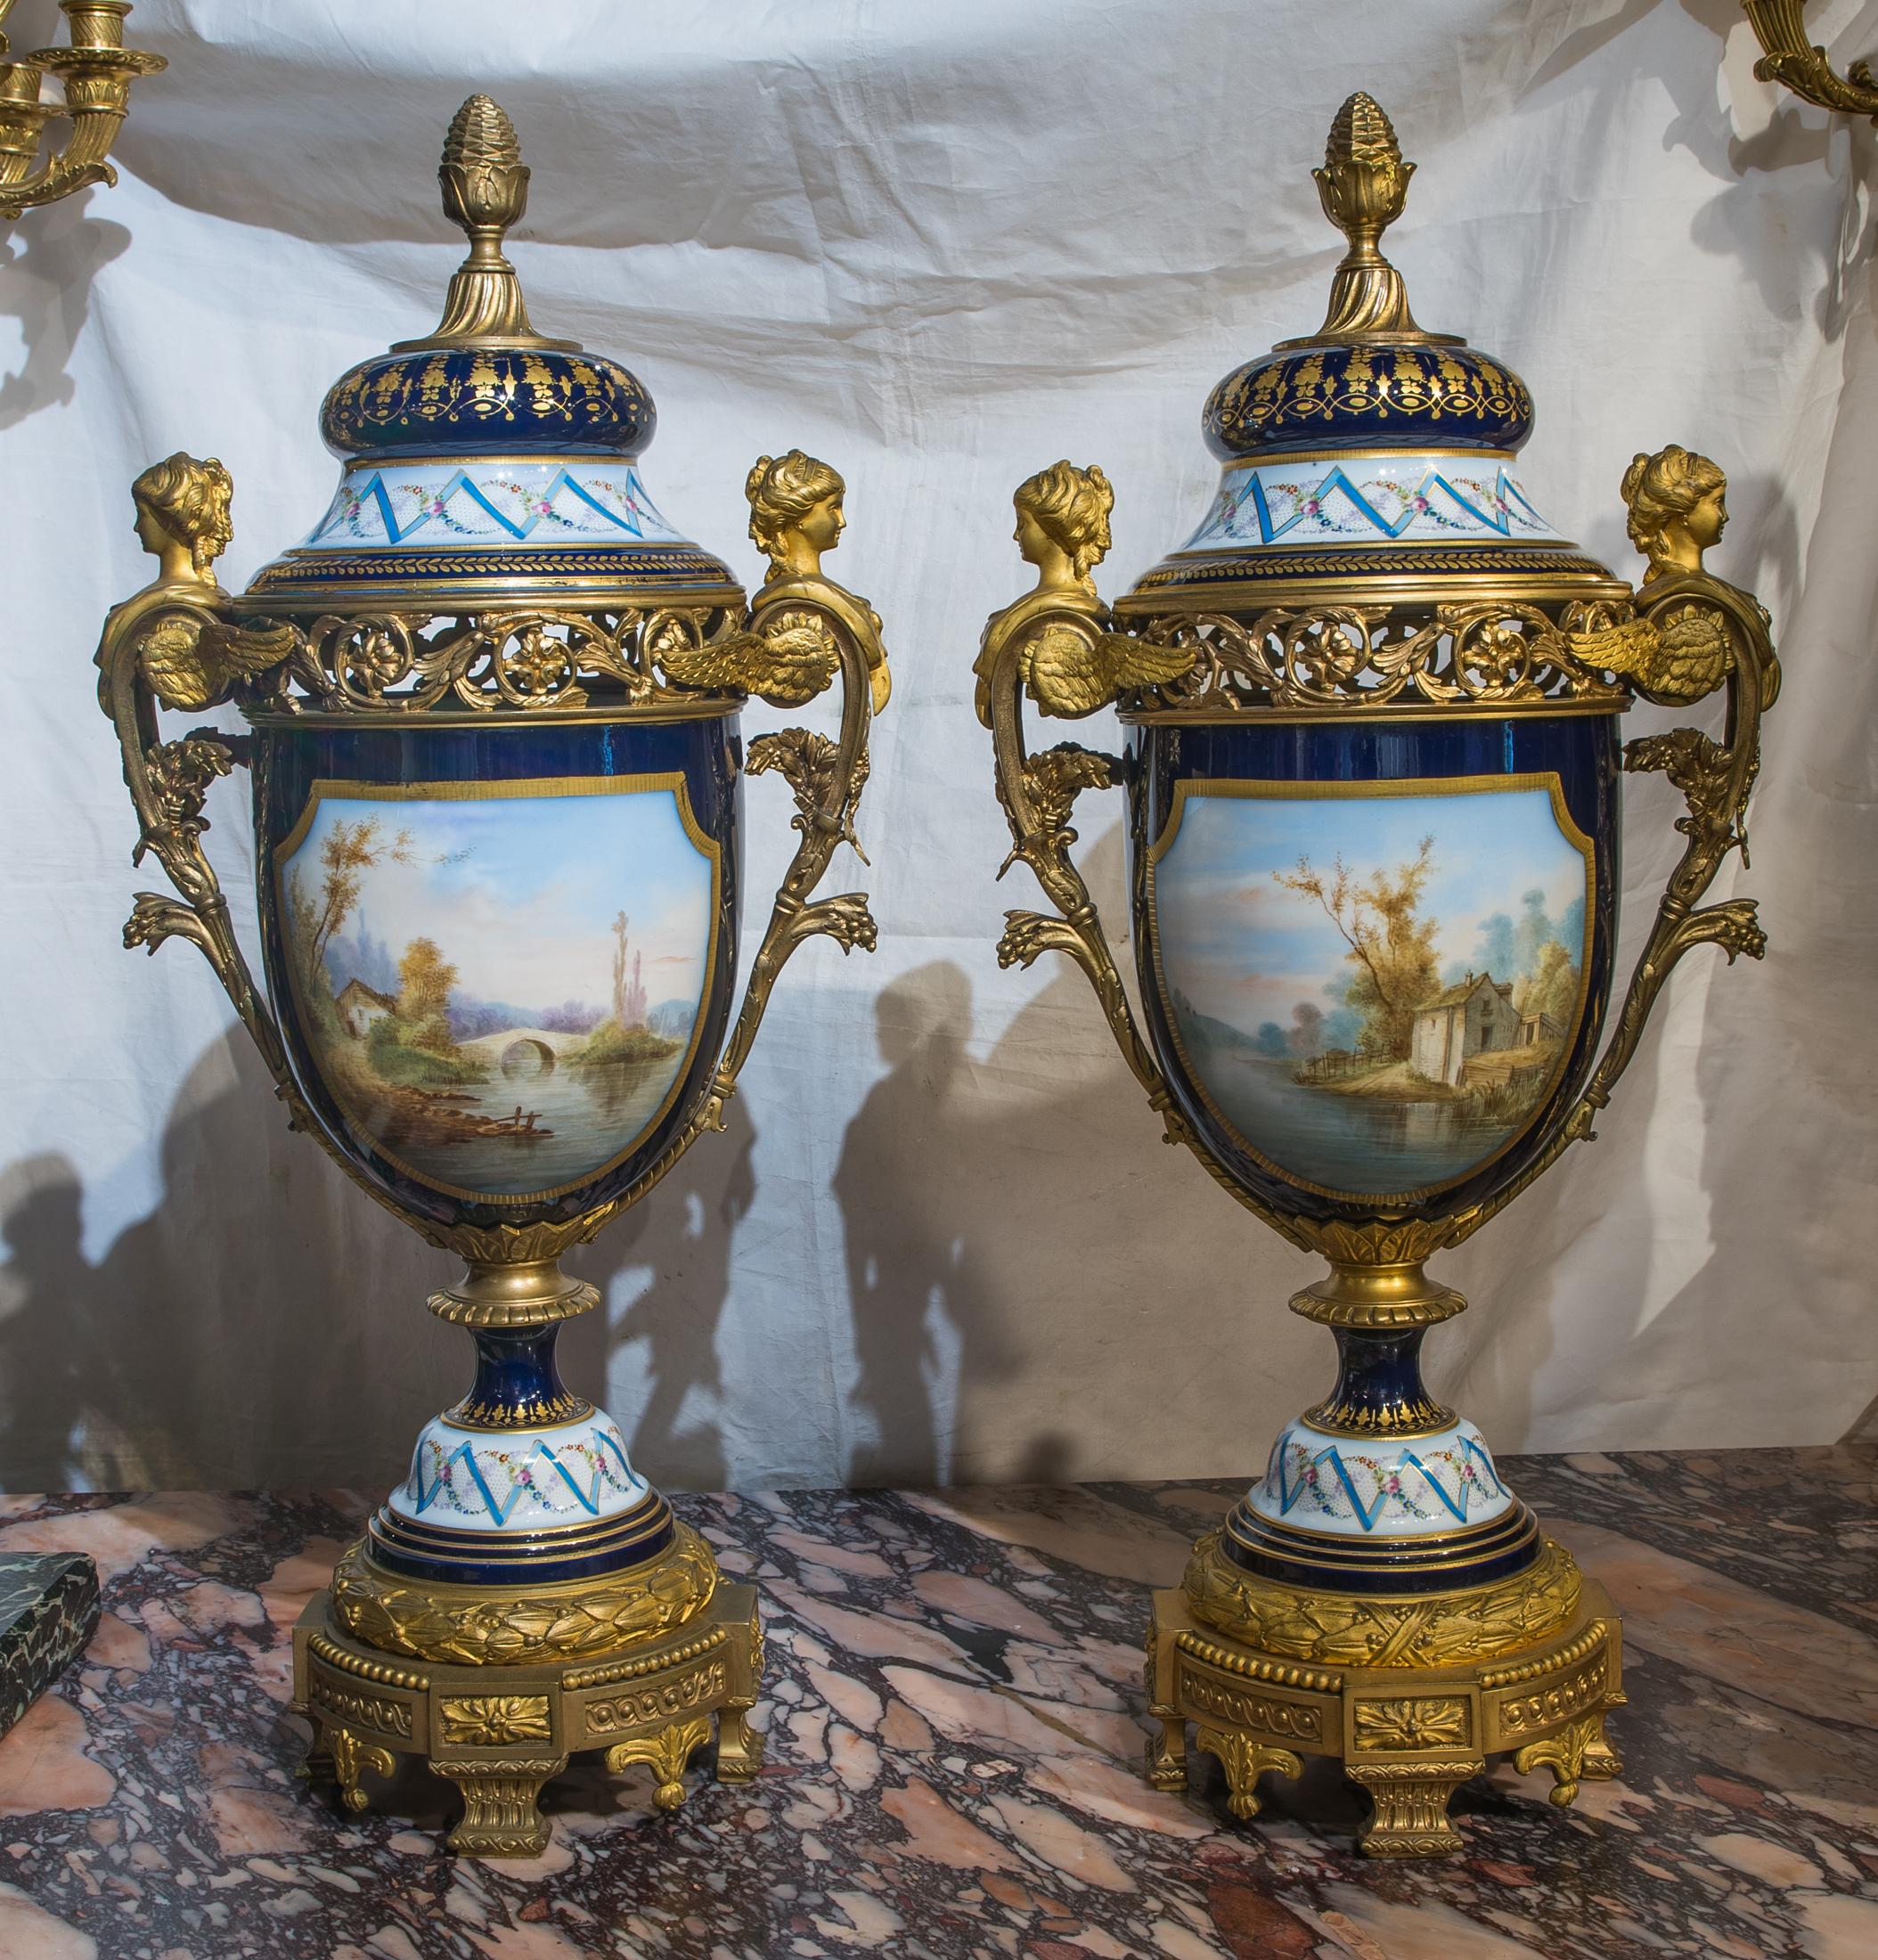 A fine and important Sèvres style bronze mounted and cobalt porcelain with hand painted courting figures in landscapes.

Origin: French
Date: 19th century
Dimension: 29 in. x 13 in.